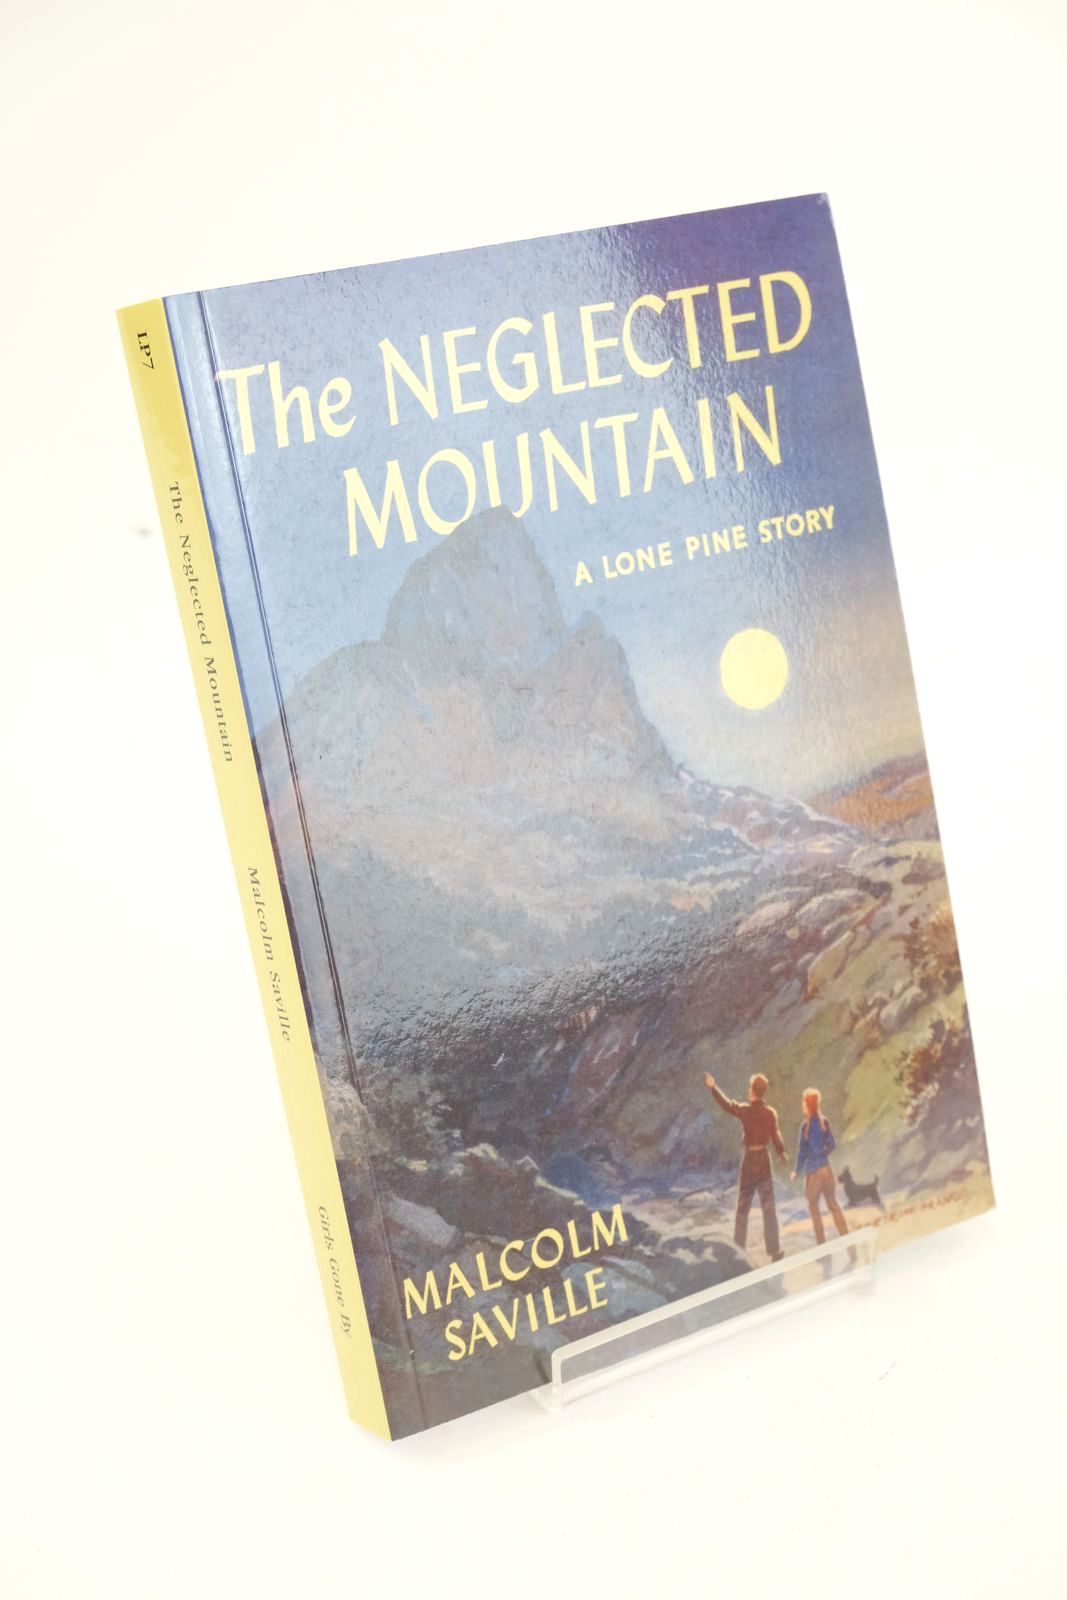 Photo of THE NEGLECTED MOUNTAIN written by Saville, Malcolm illustrated by Prance, Bertram published by Girls Gone By (STOCK CODE: 1325444)  for sale by Stella & Rose's Books